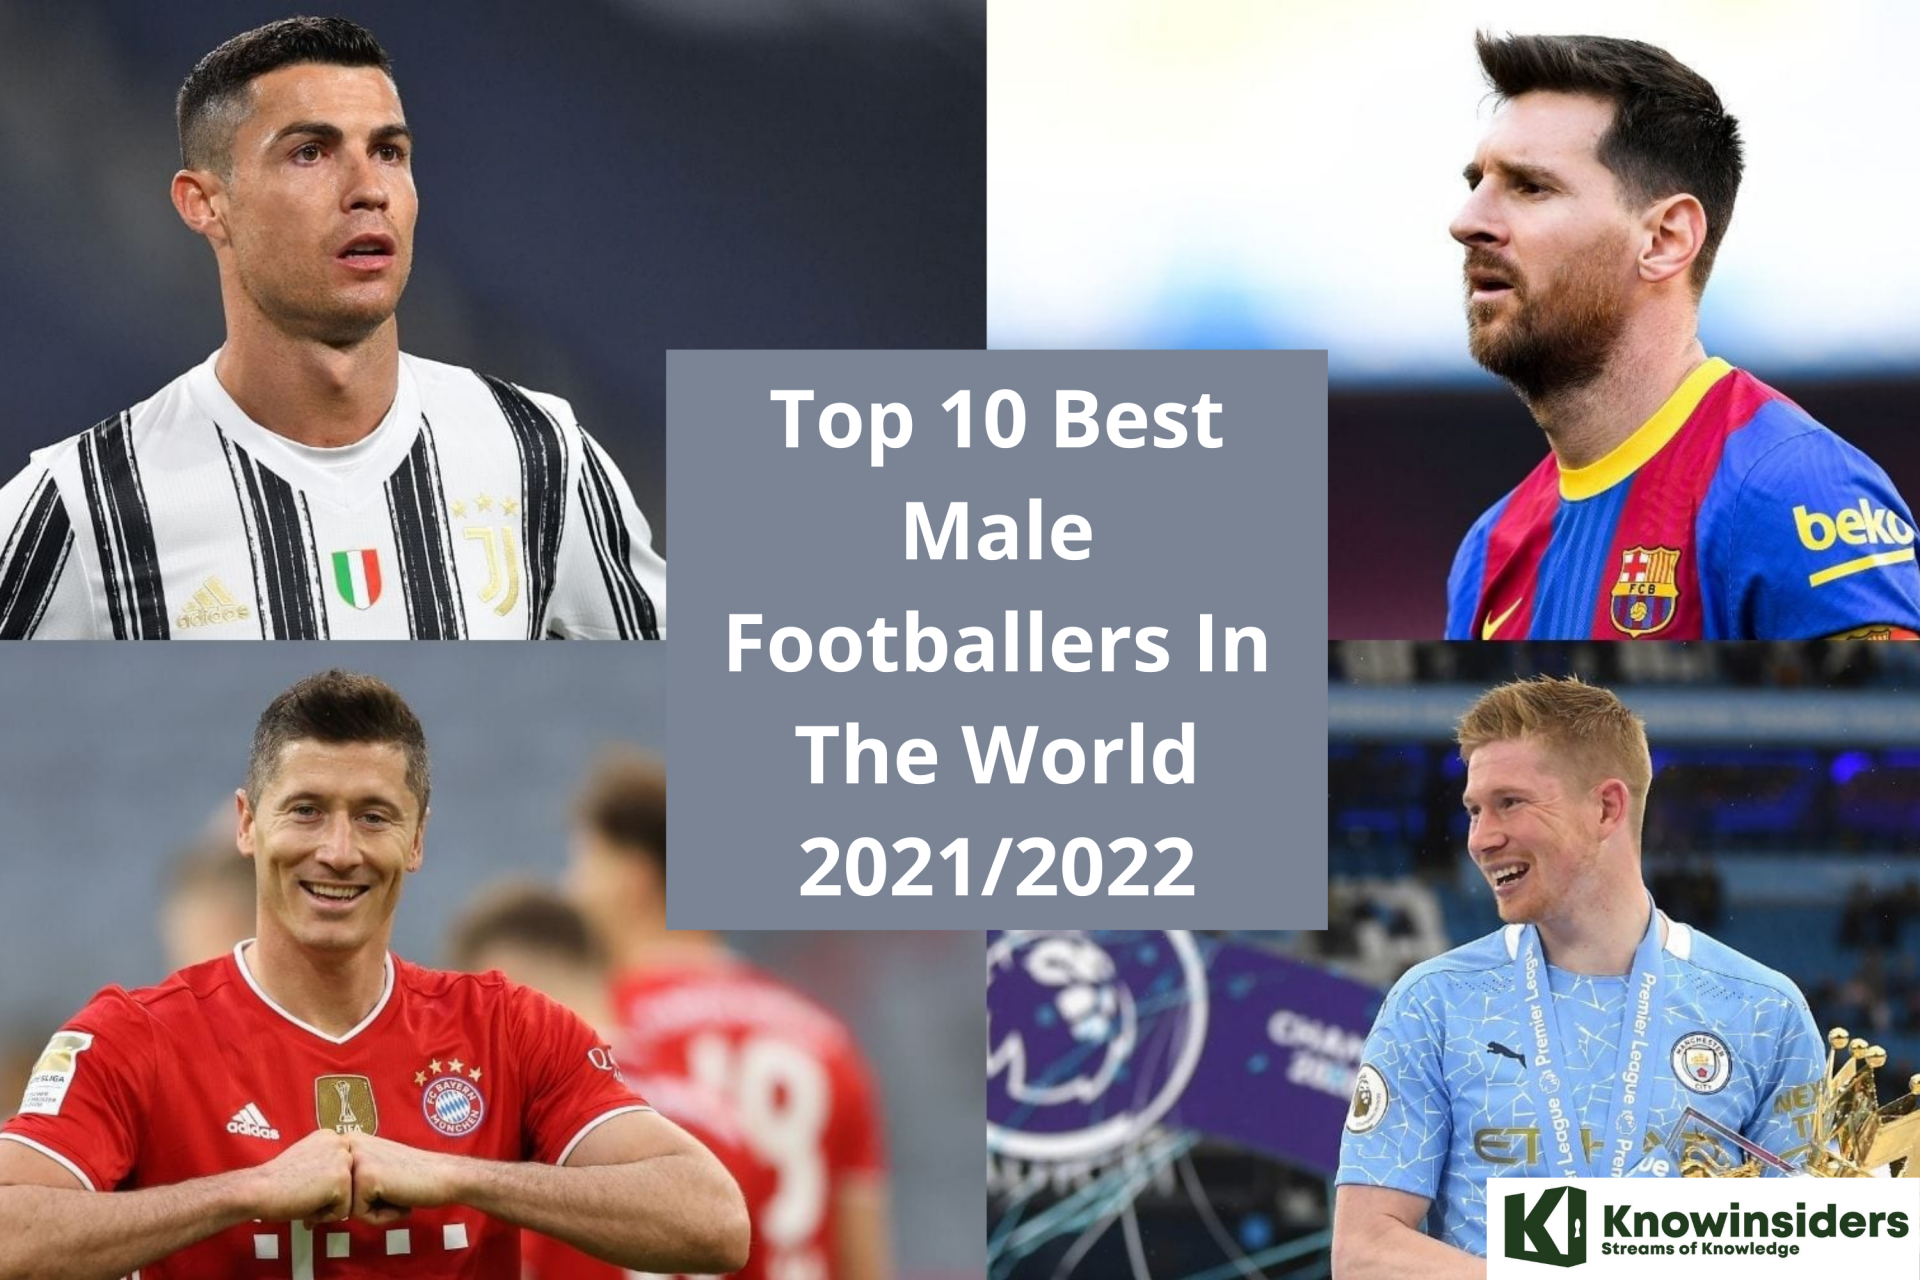 Top 10 Best Male Footballers In The World 2022